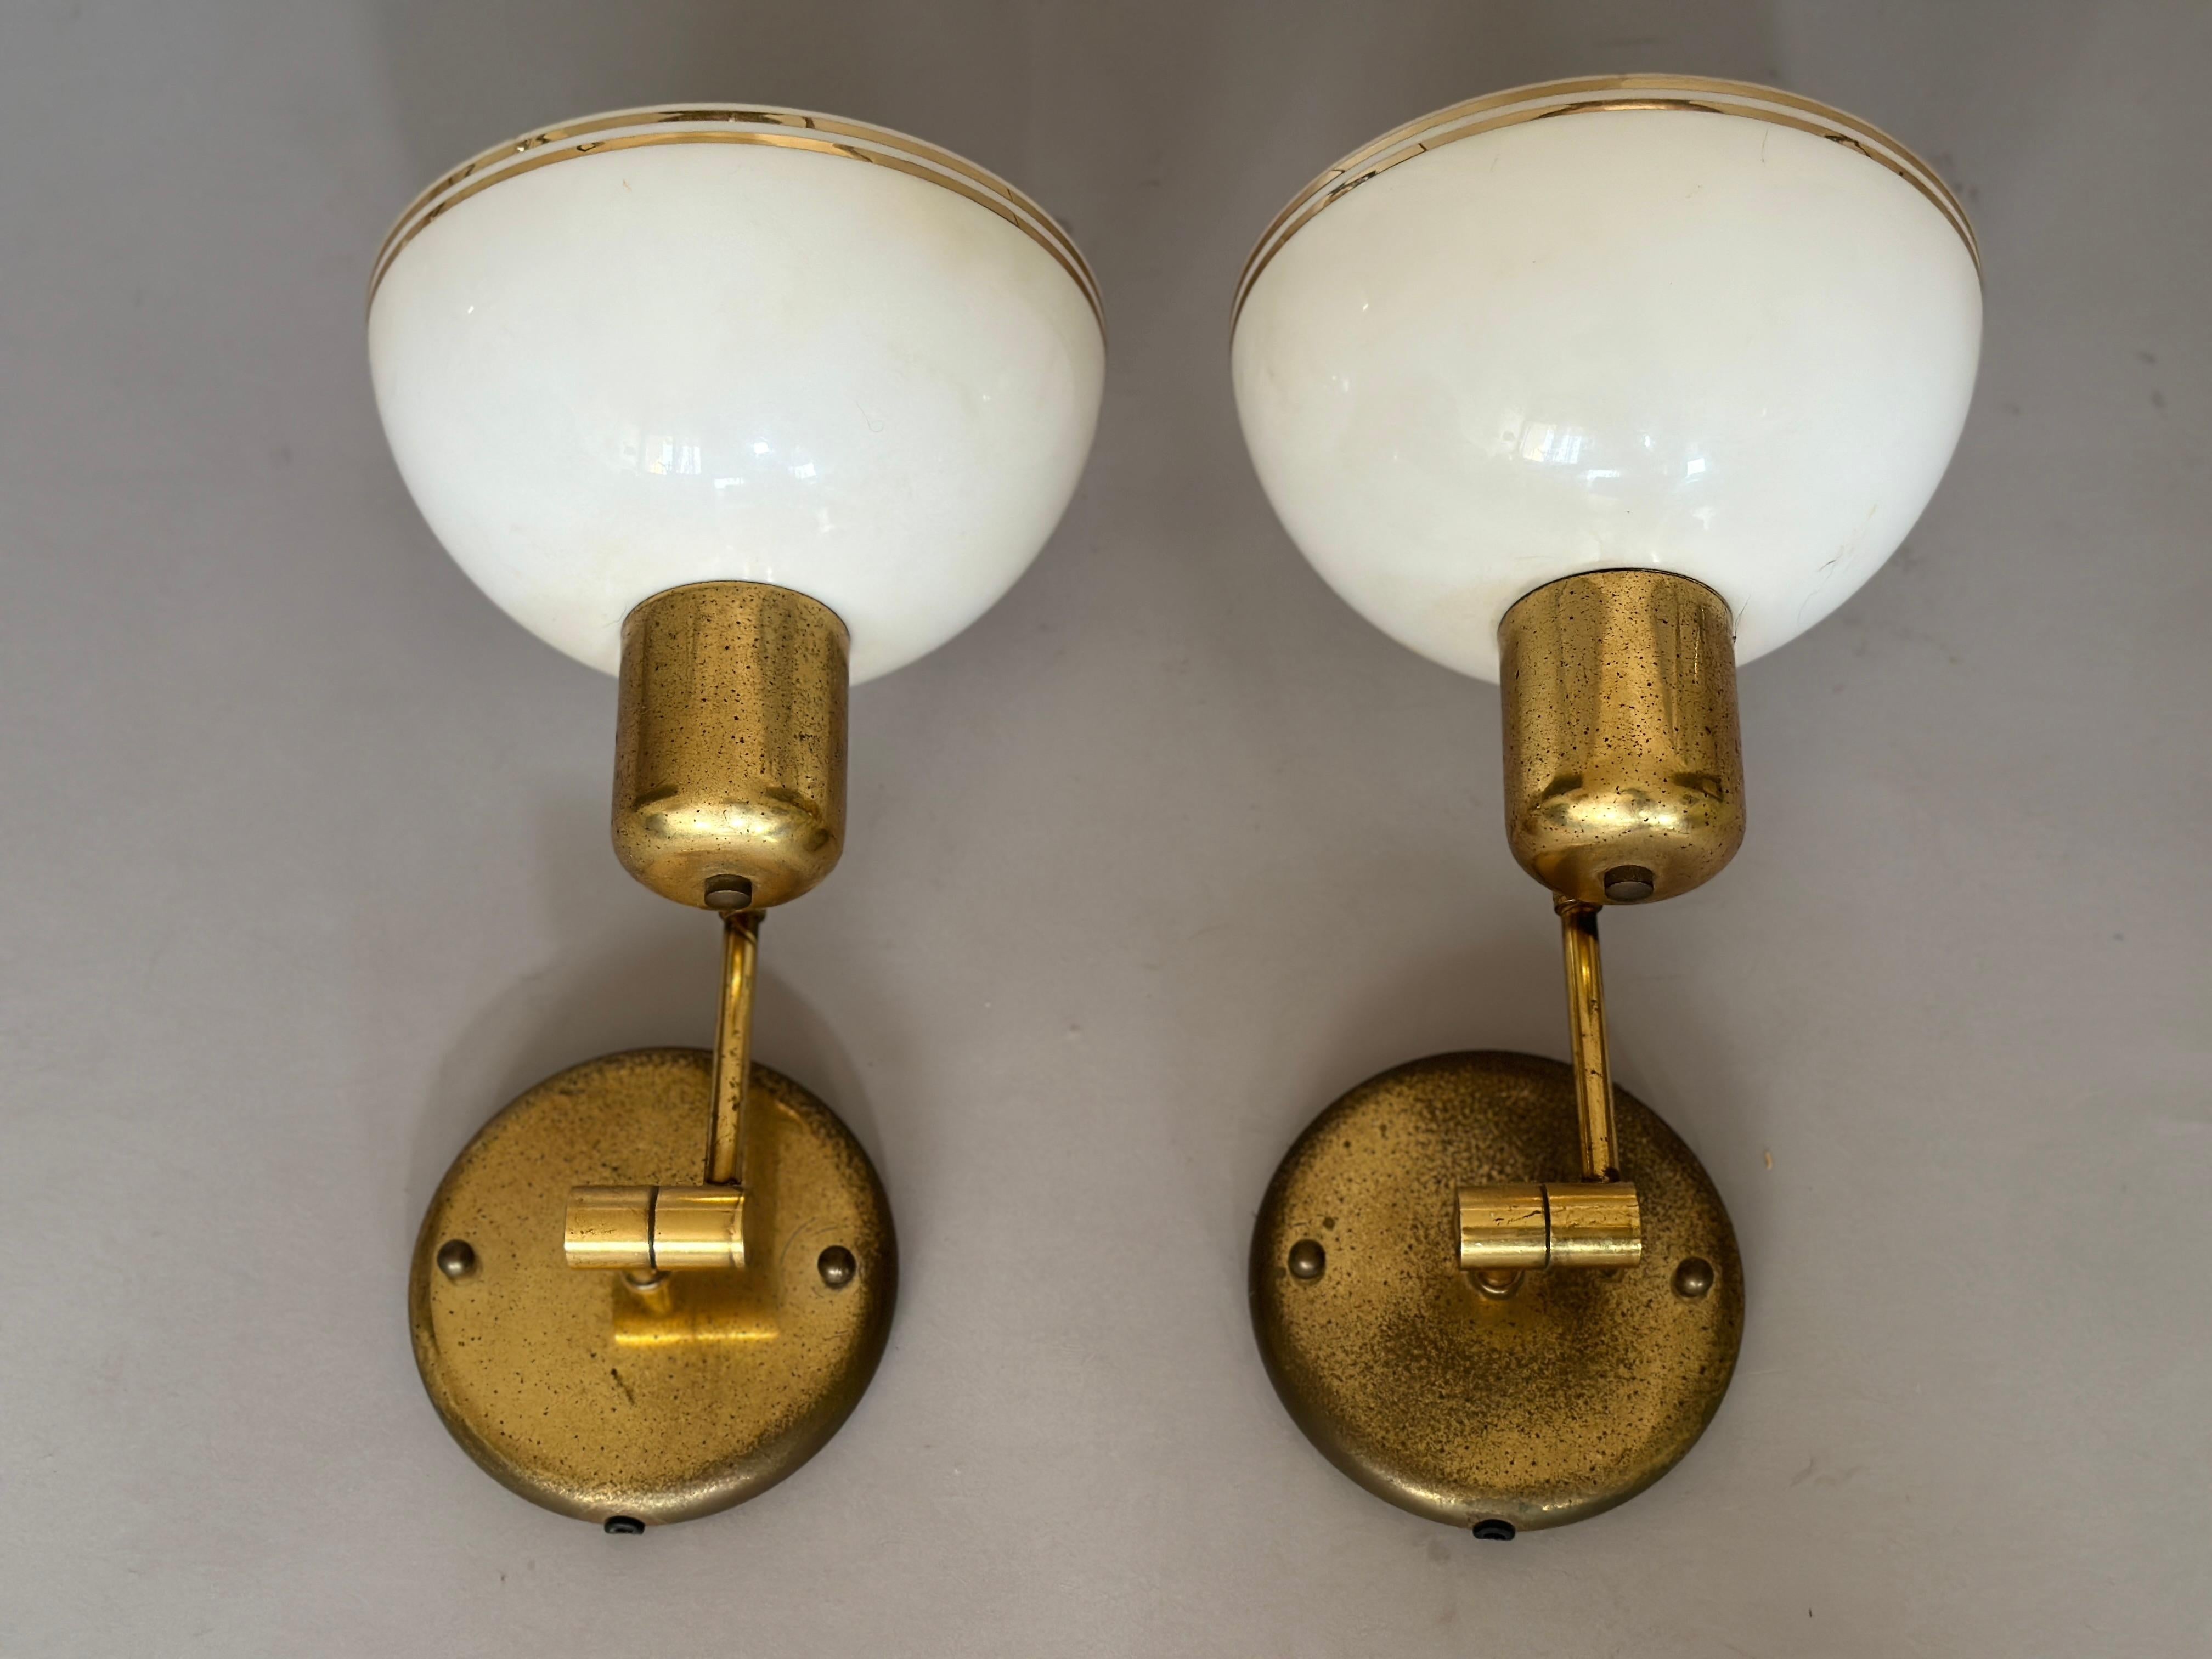 Reare KOCH AND LOWY OMI wall lamp 1960s.